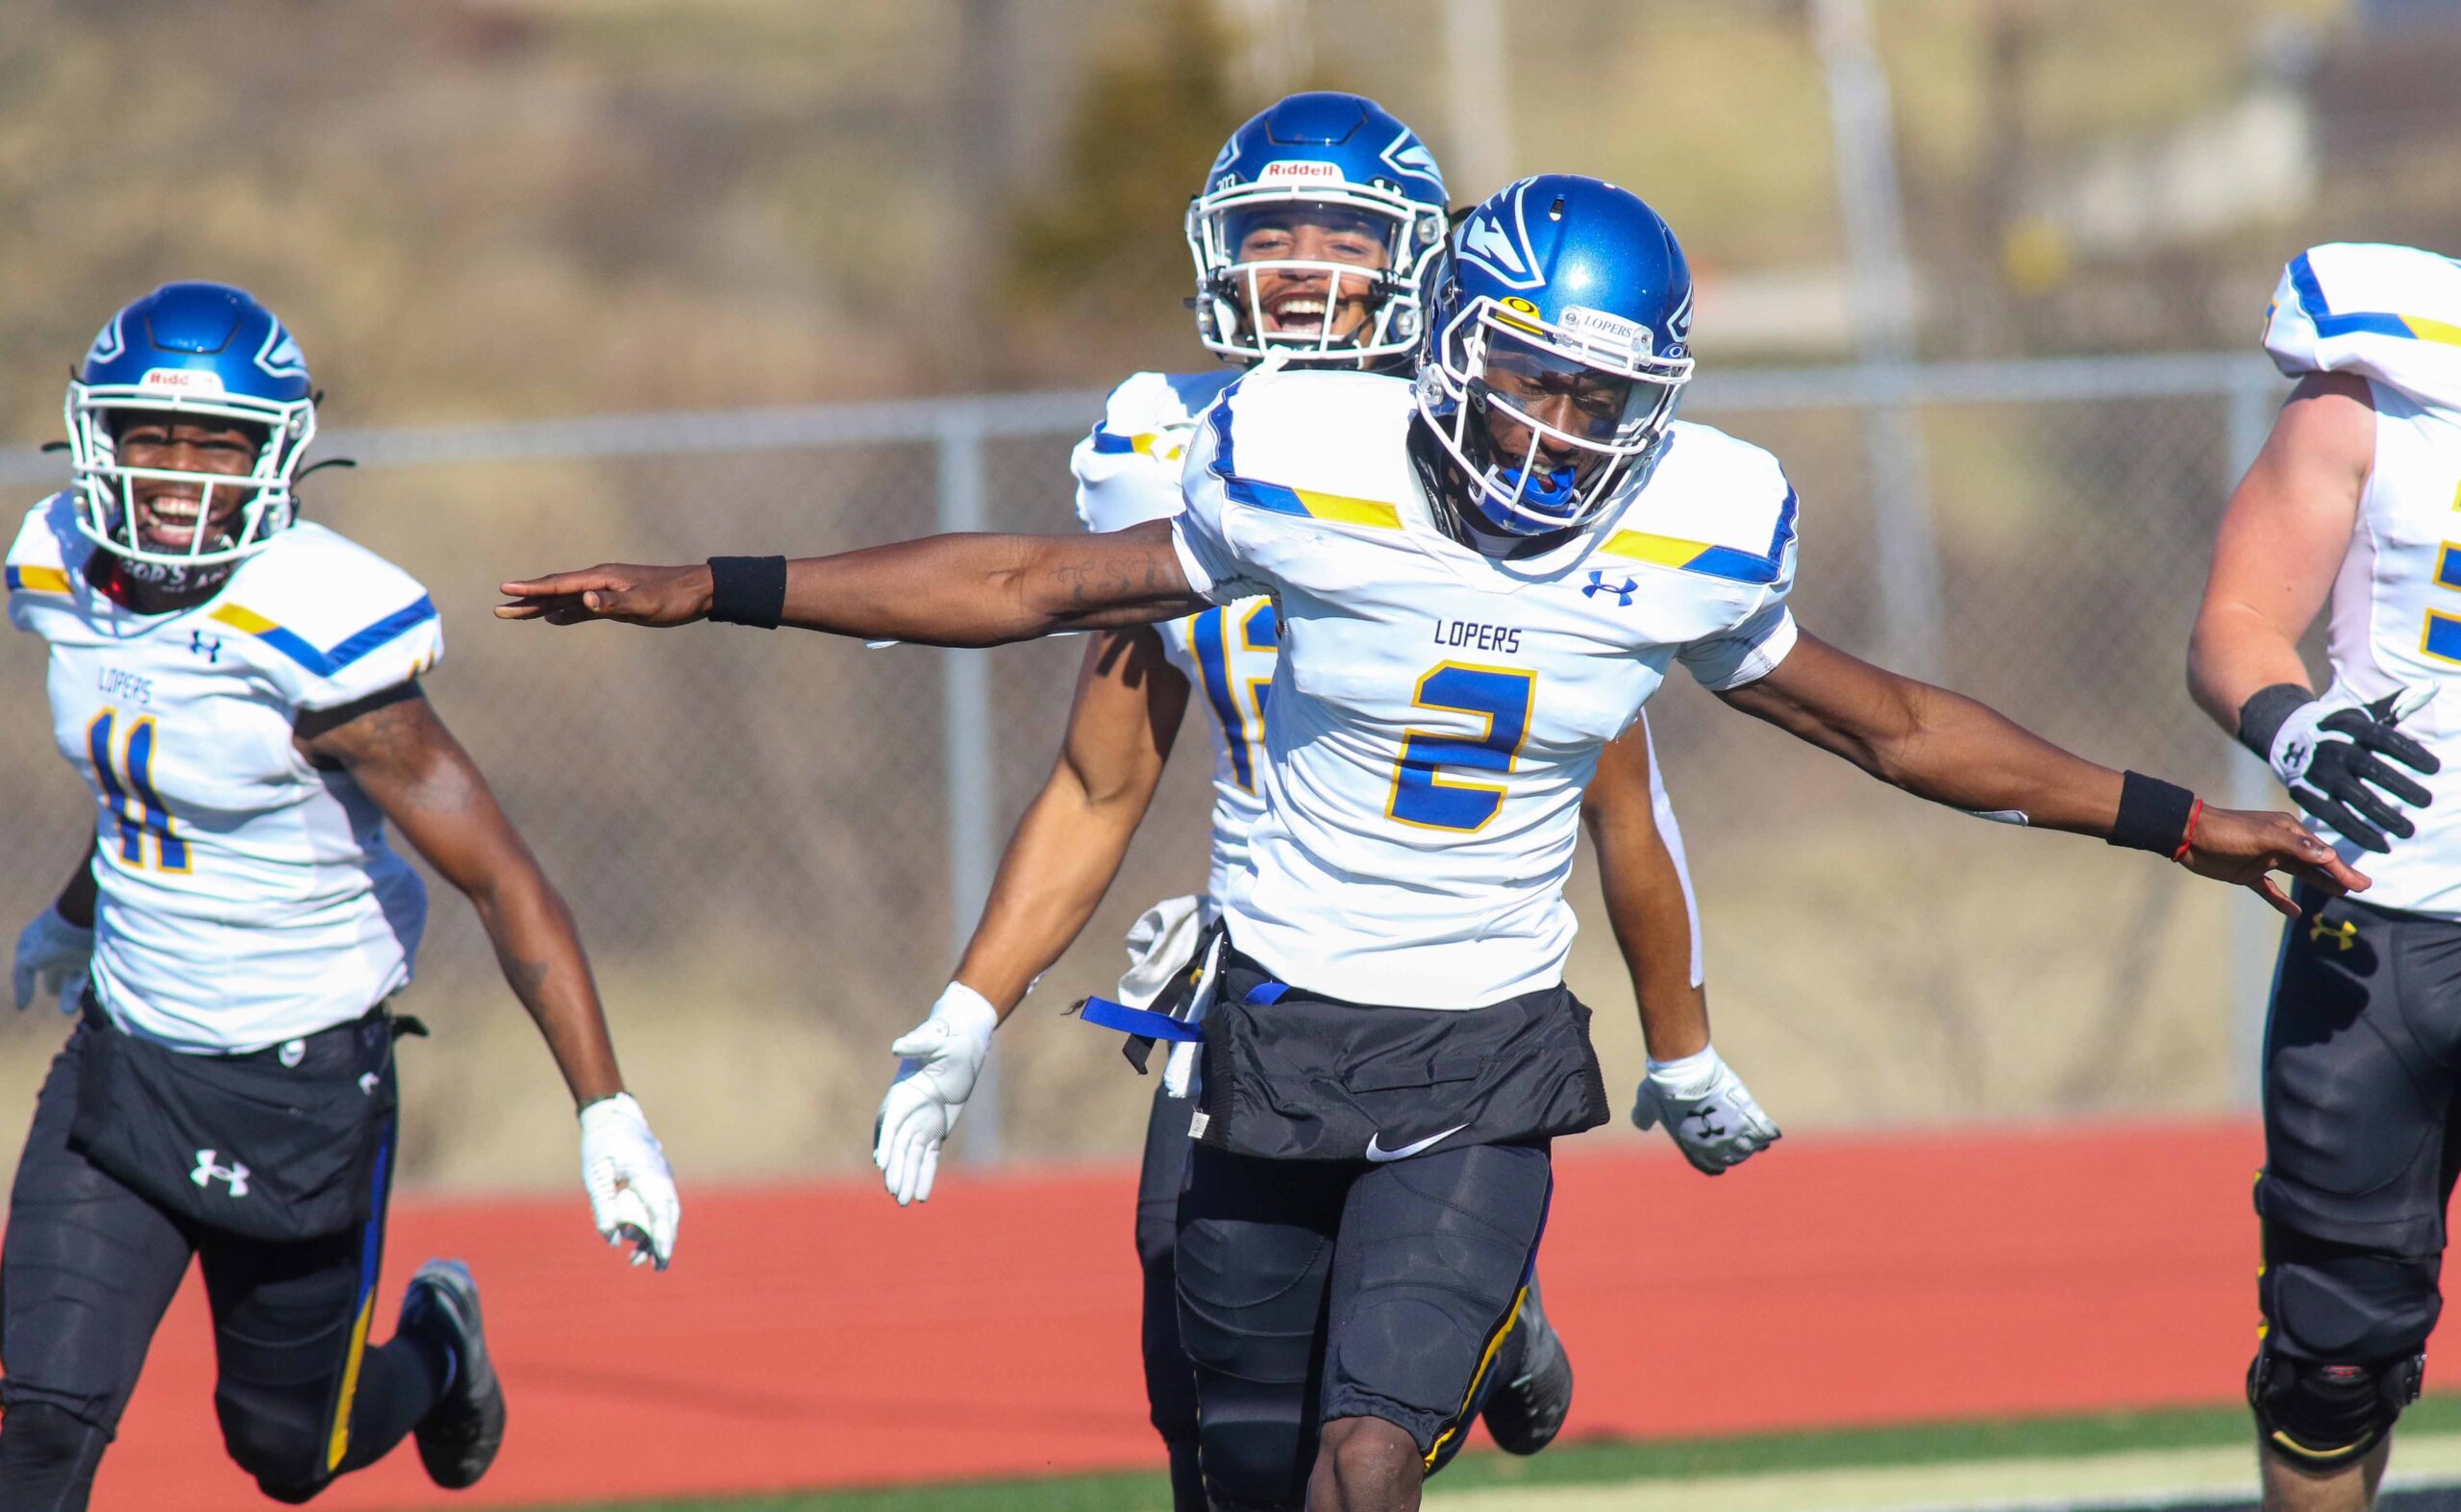 UNK football to play four-game schedule this fall; Opener Oct. 31 at